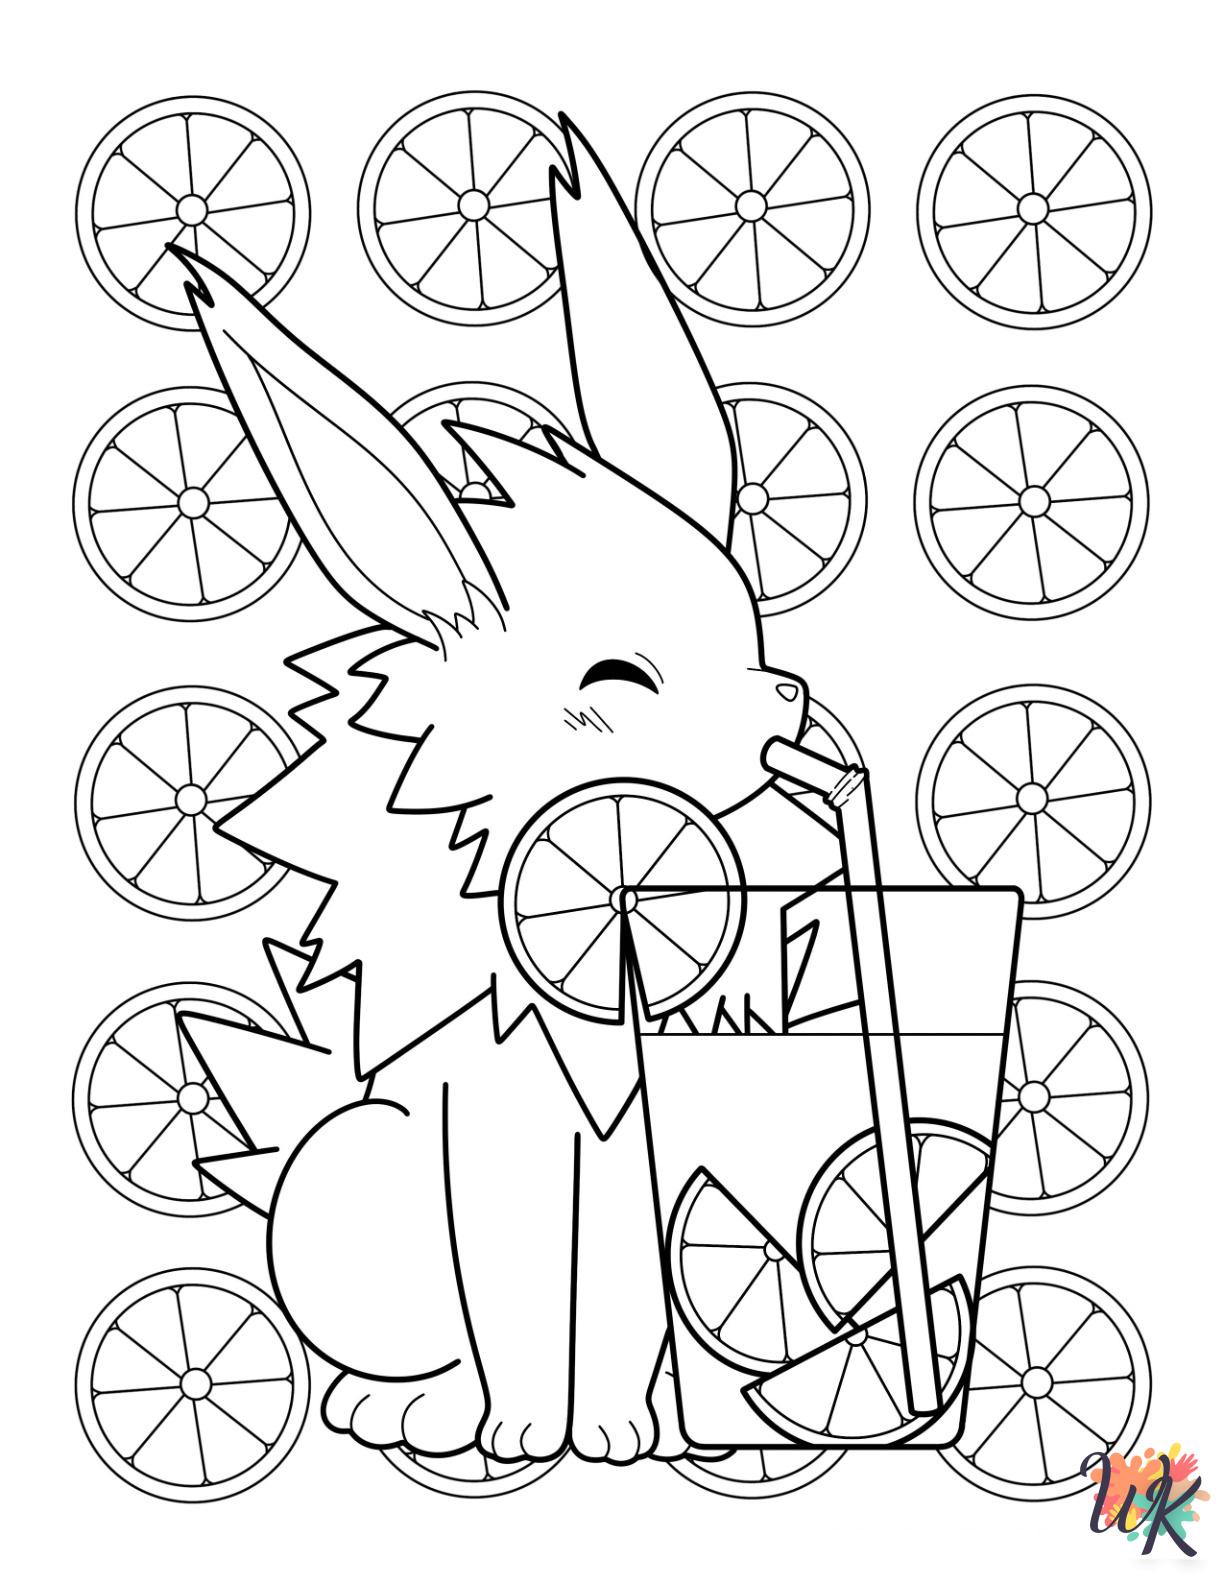 Jolteon decorations coloring pages